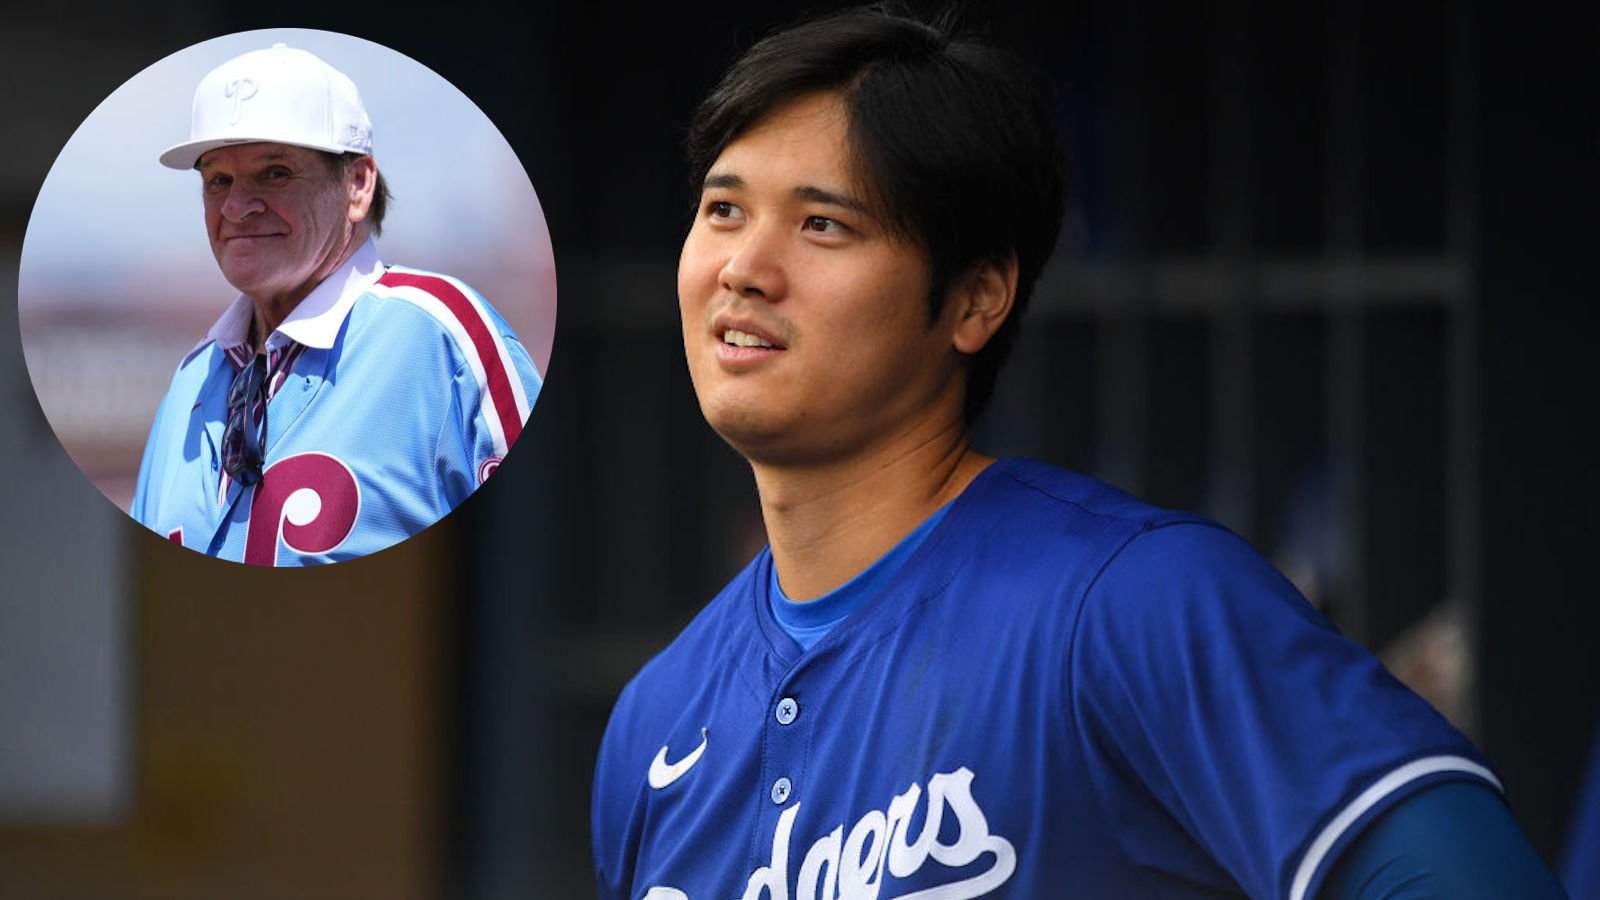 Infamous gambler Pete Rose shares his thoughts on Shohei Ohtani's scandal - cover